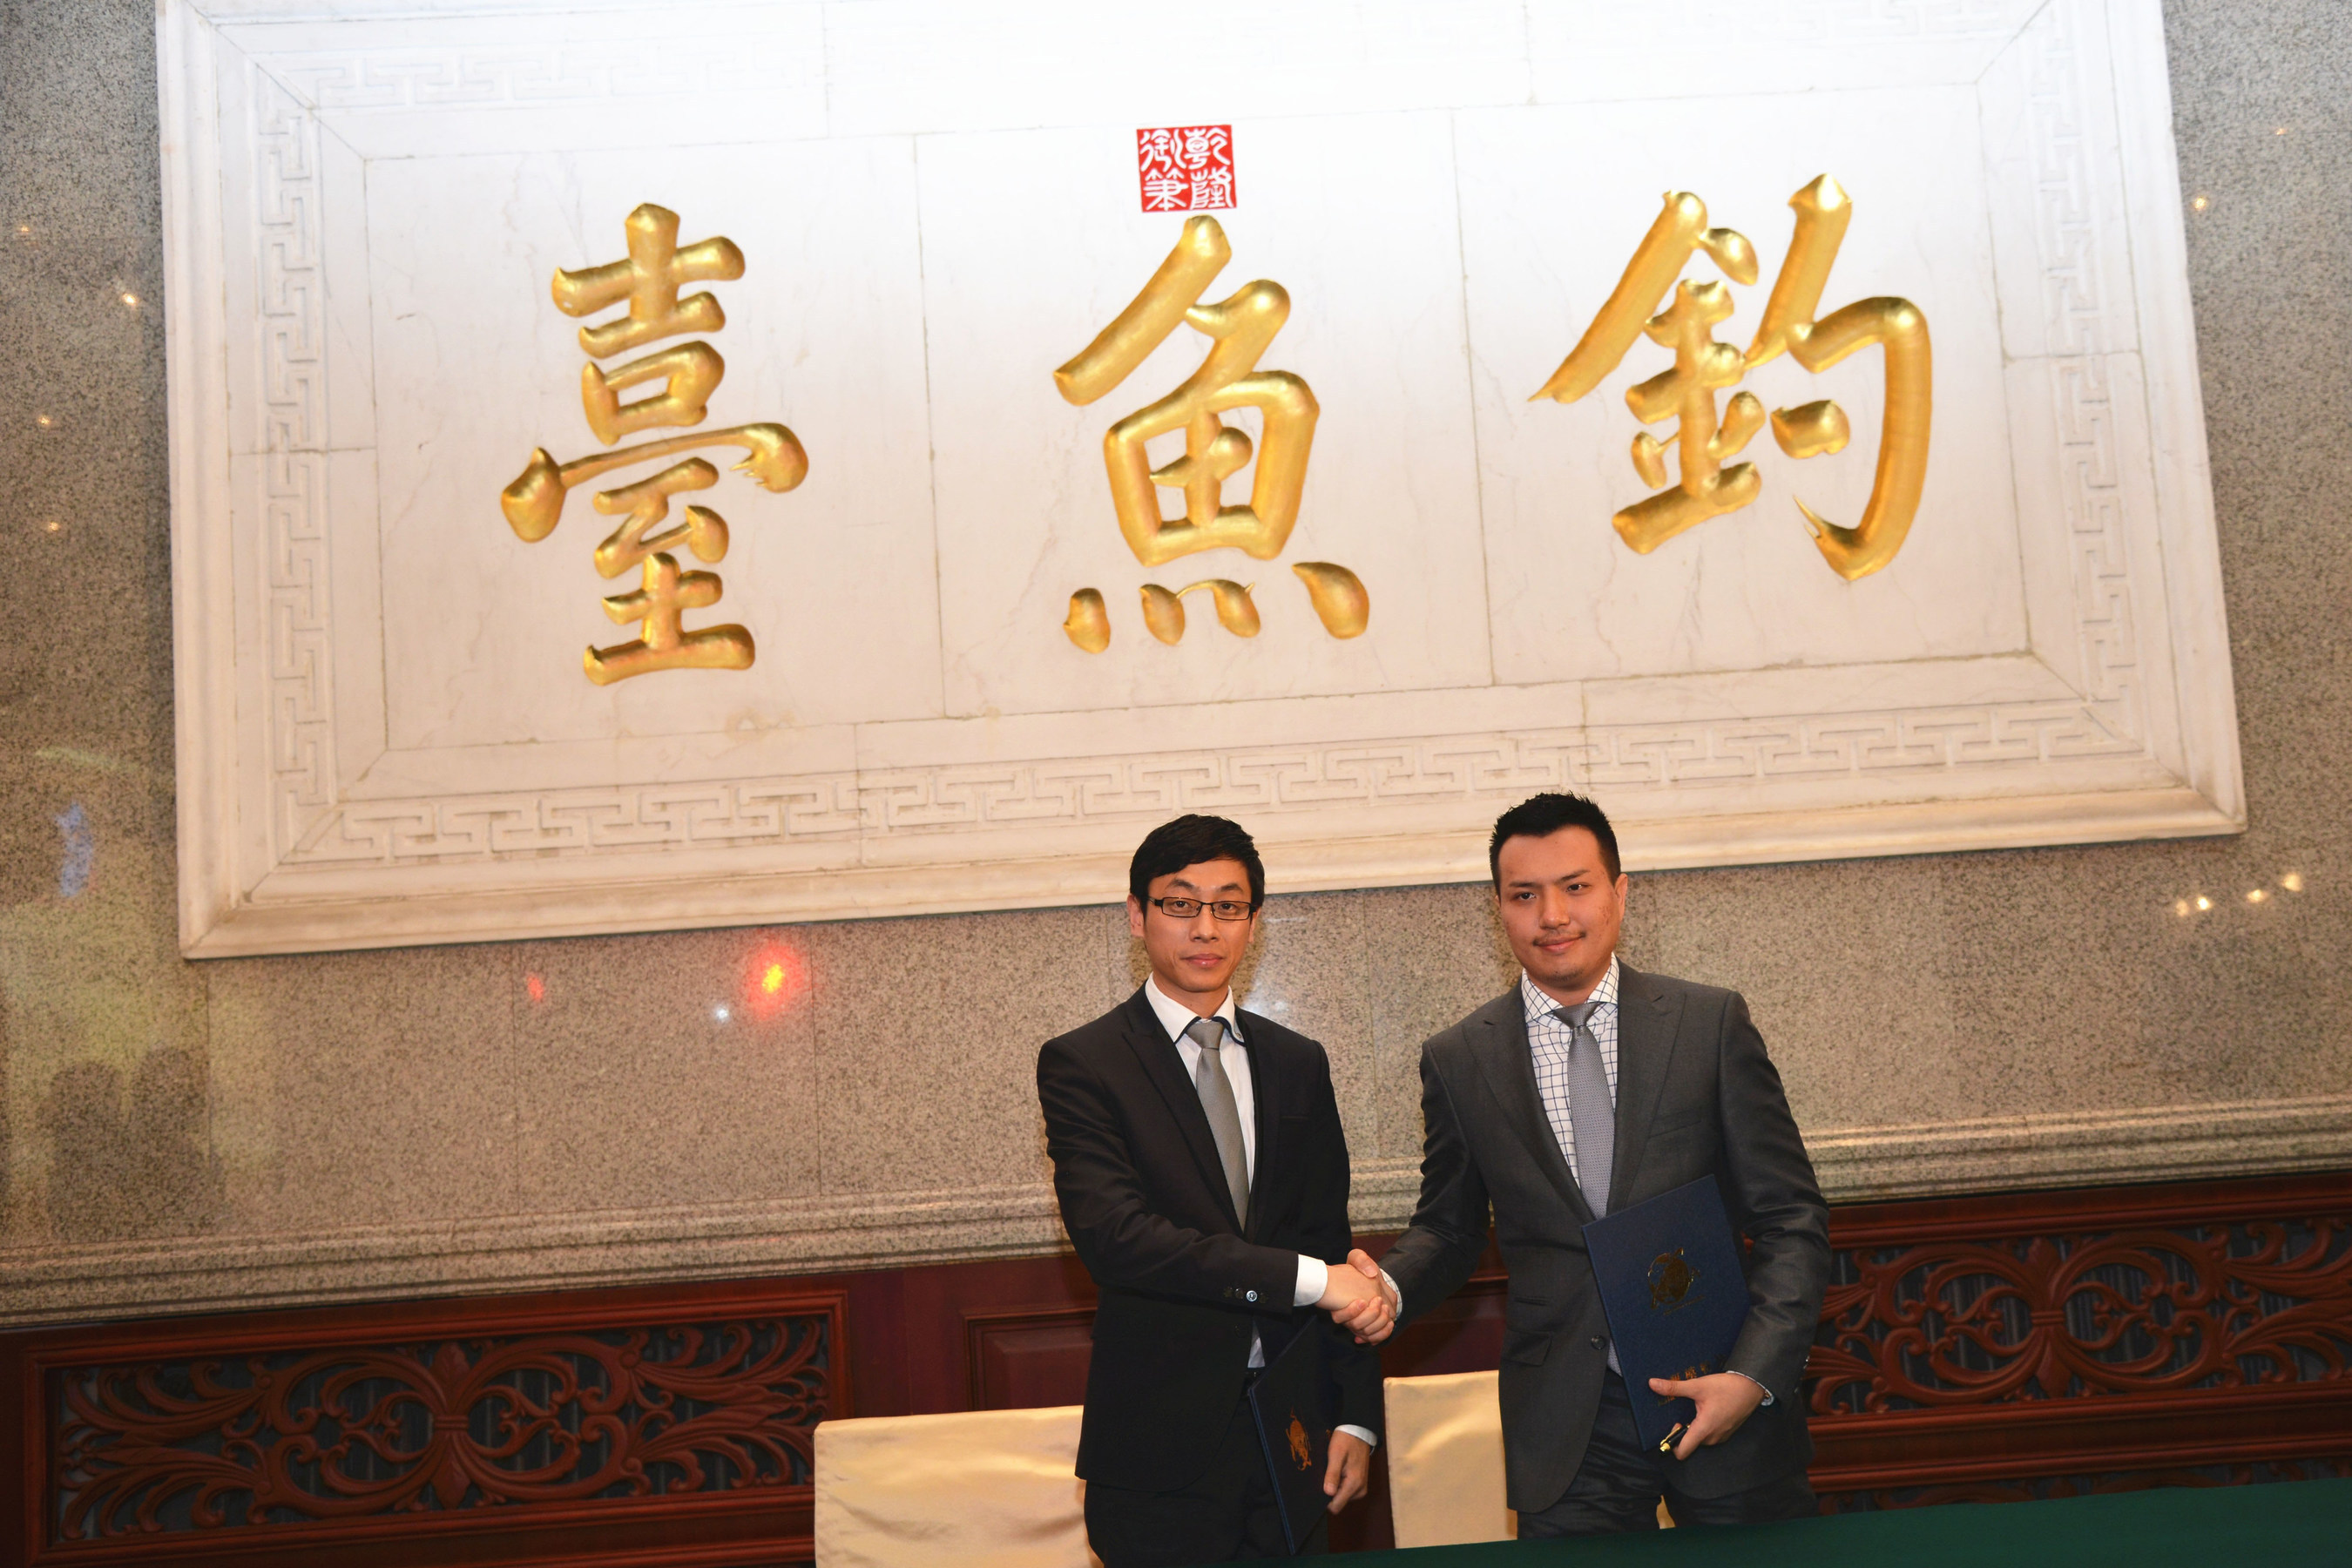 TYIN Group CEO Anthony Tsang and Asian Model Association Signed Agreement to Promote the Silk Road